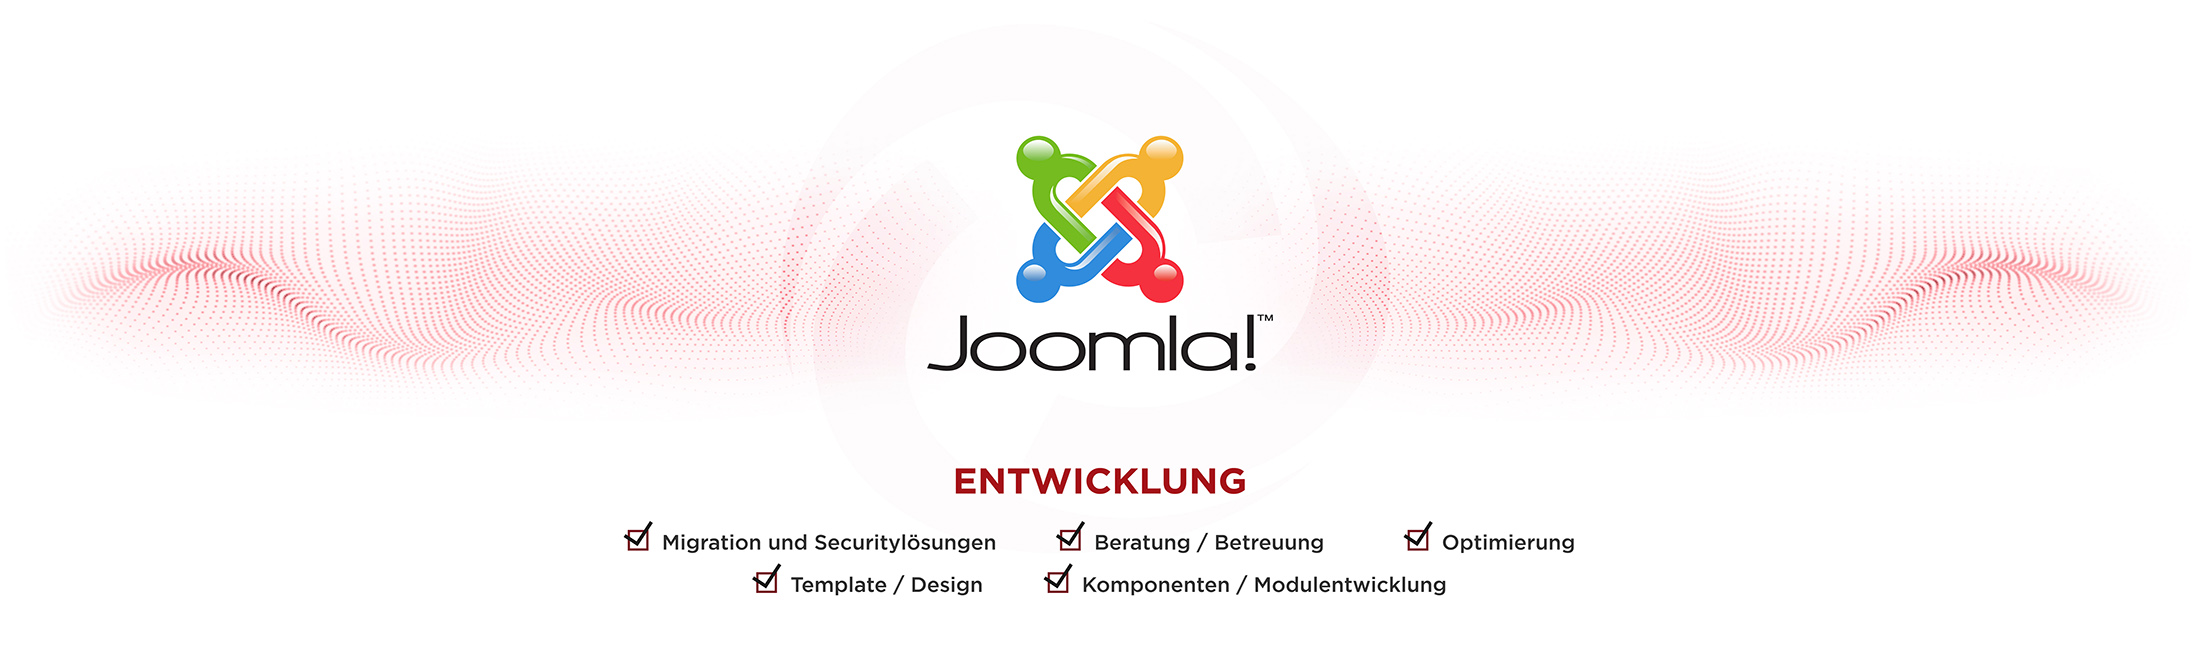 Joomla Webdesign by FaNetwork